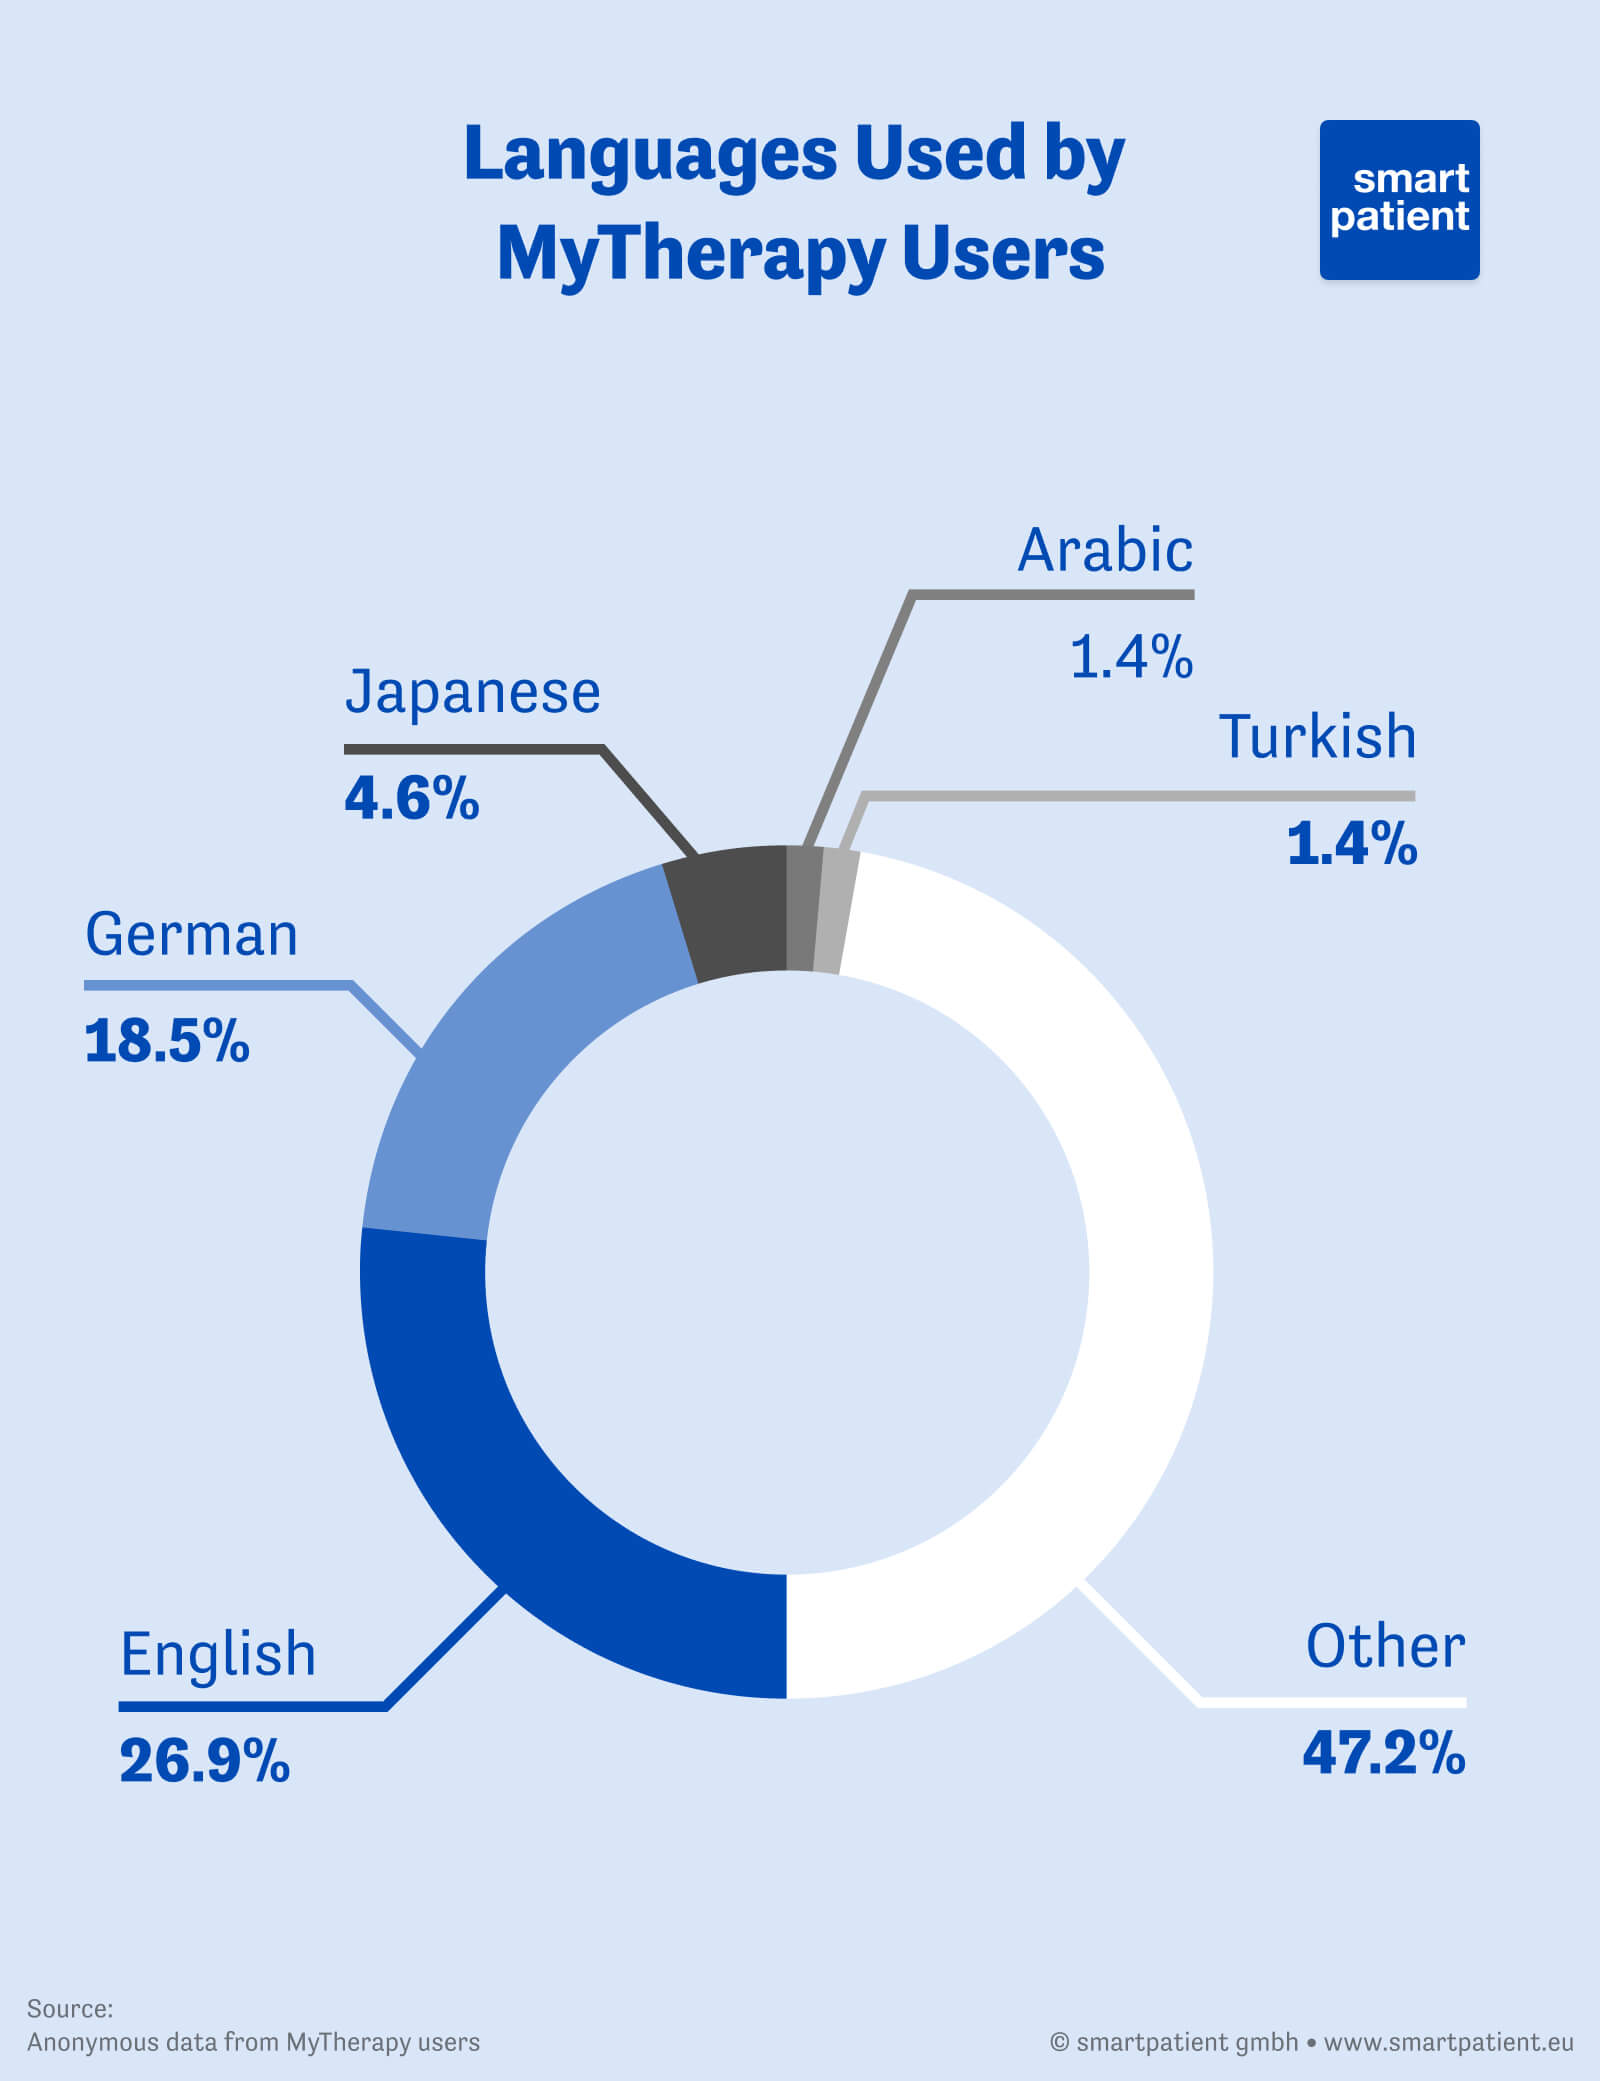 A graph showing the percentage of users who use MyTherapy in different languages: 26.9% English, 18.5% German, 4.6% Japanese, 1.4% Arabic, Turkish 1.4%, 47.2% Other